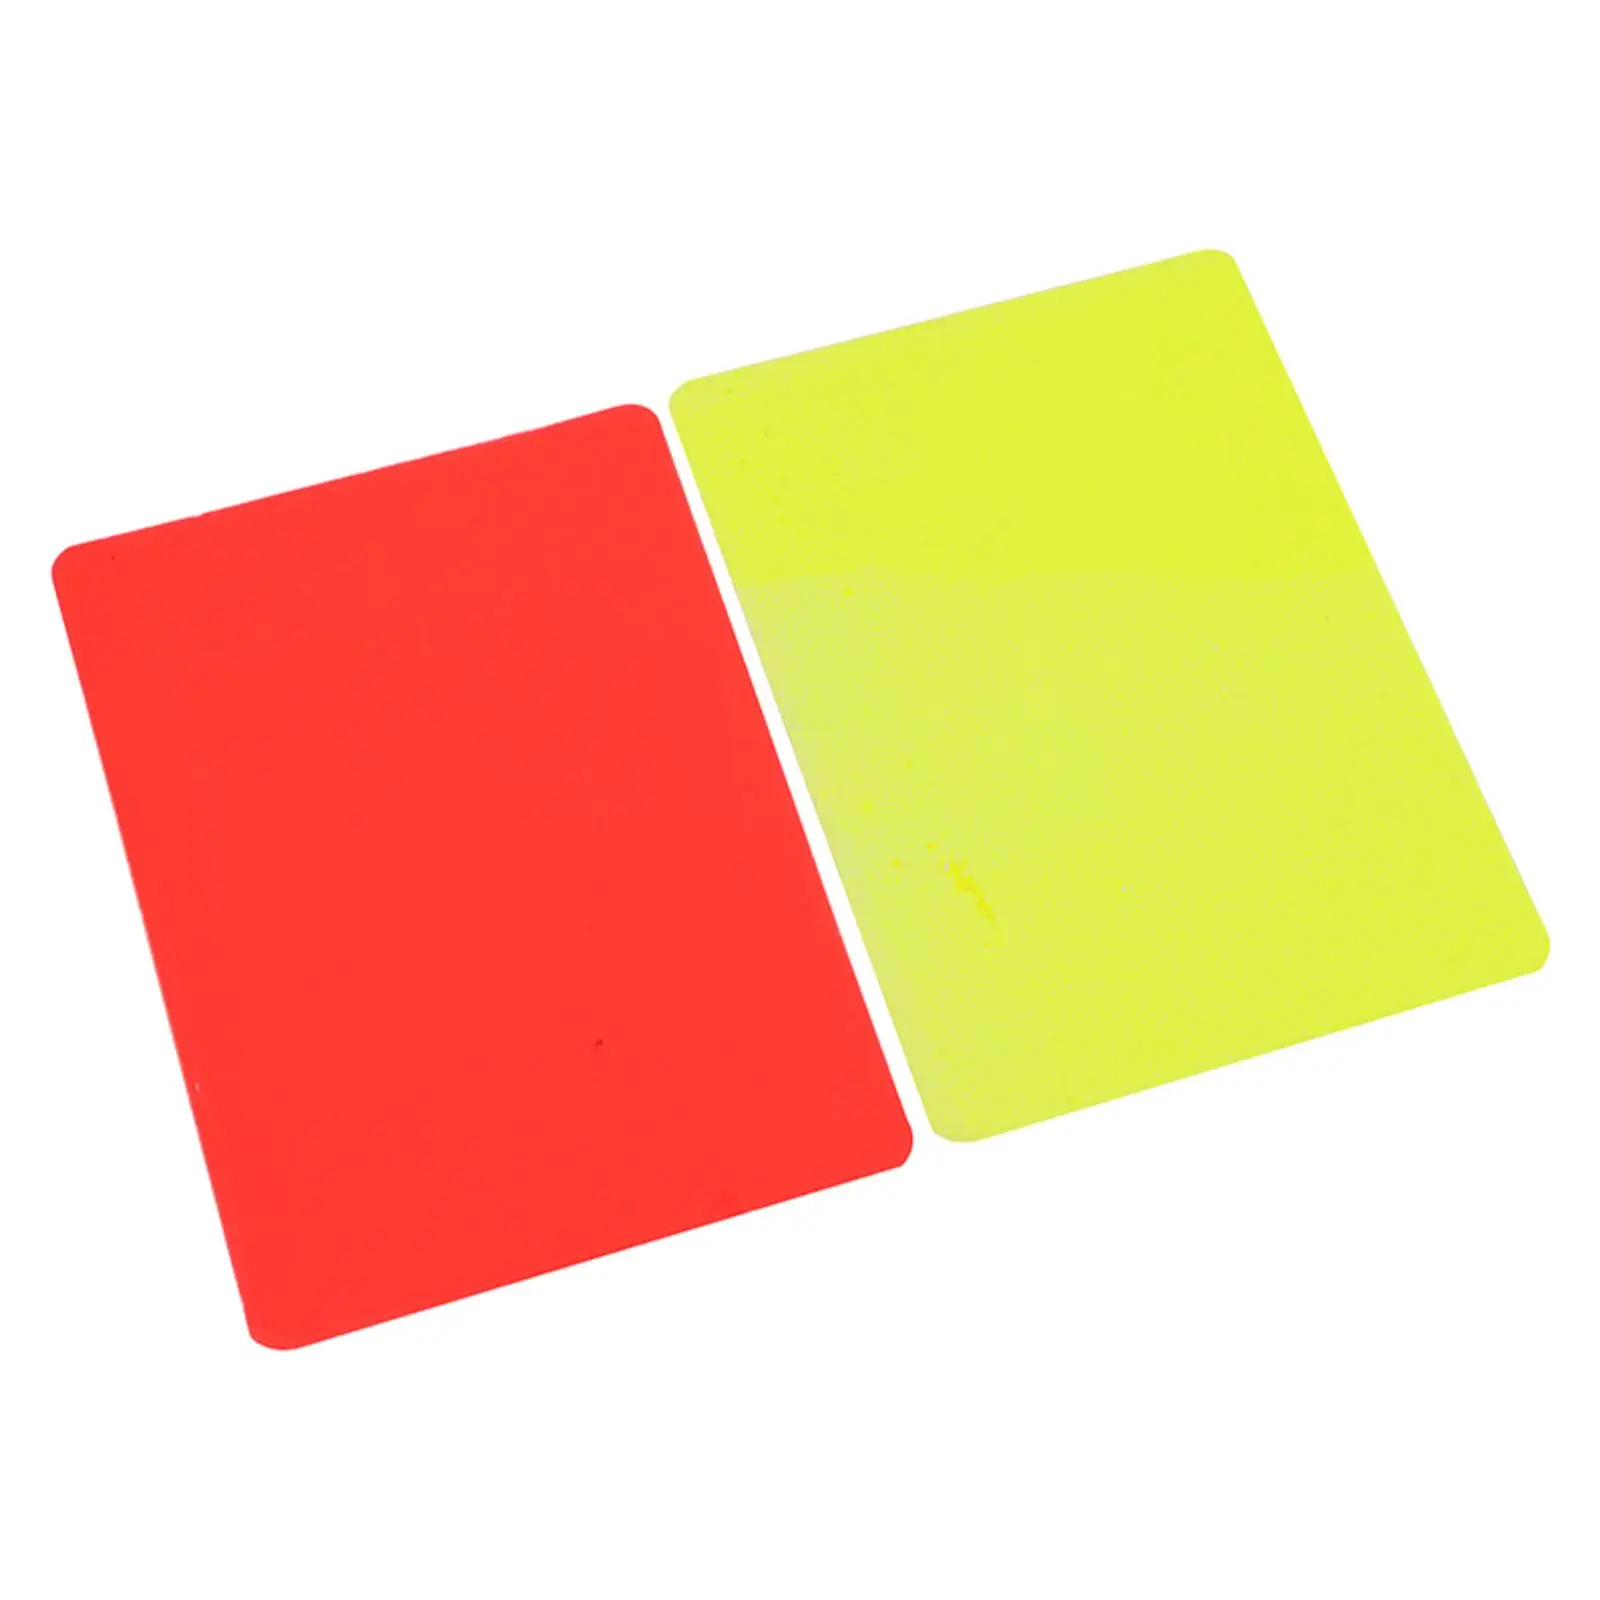 2Pcs Soccer Referee Card Warning Red Yellow Card Referee Accessory Referee Card Set for Basketball Boys Men Football Training